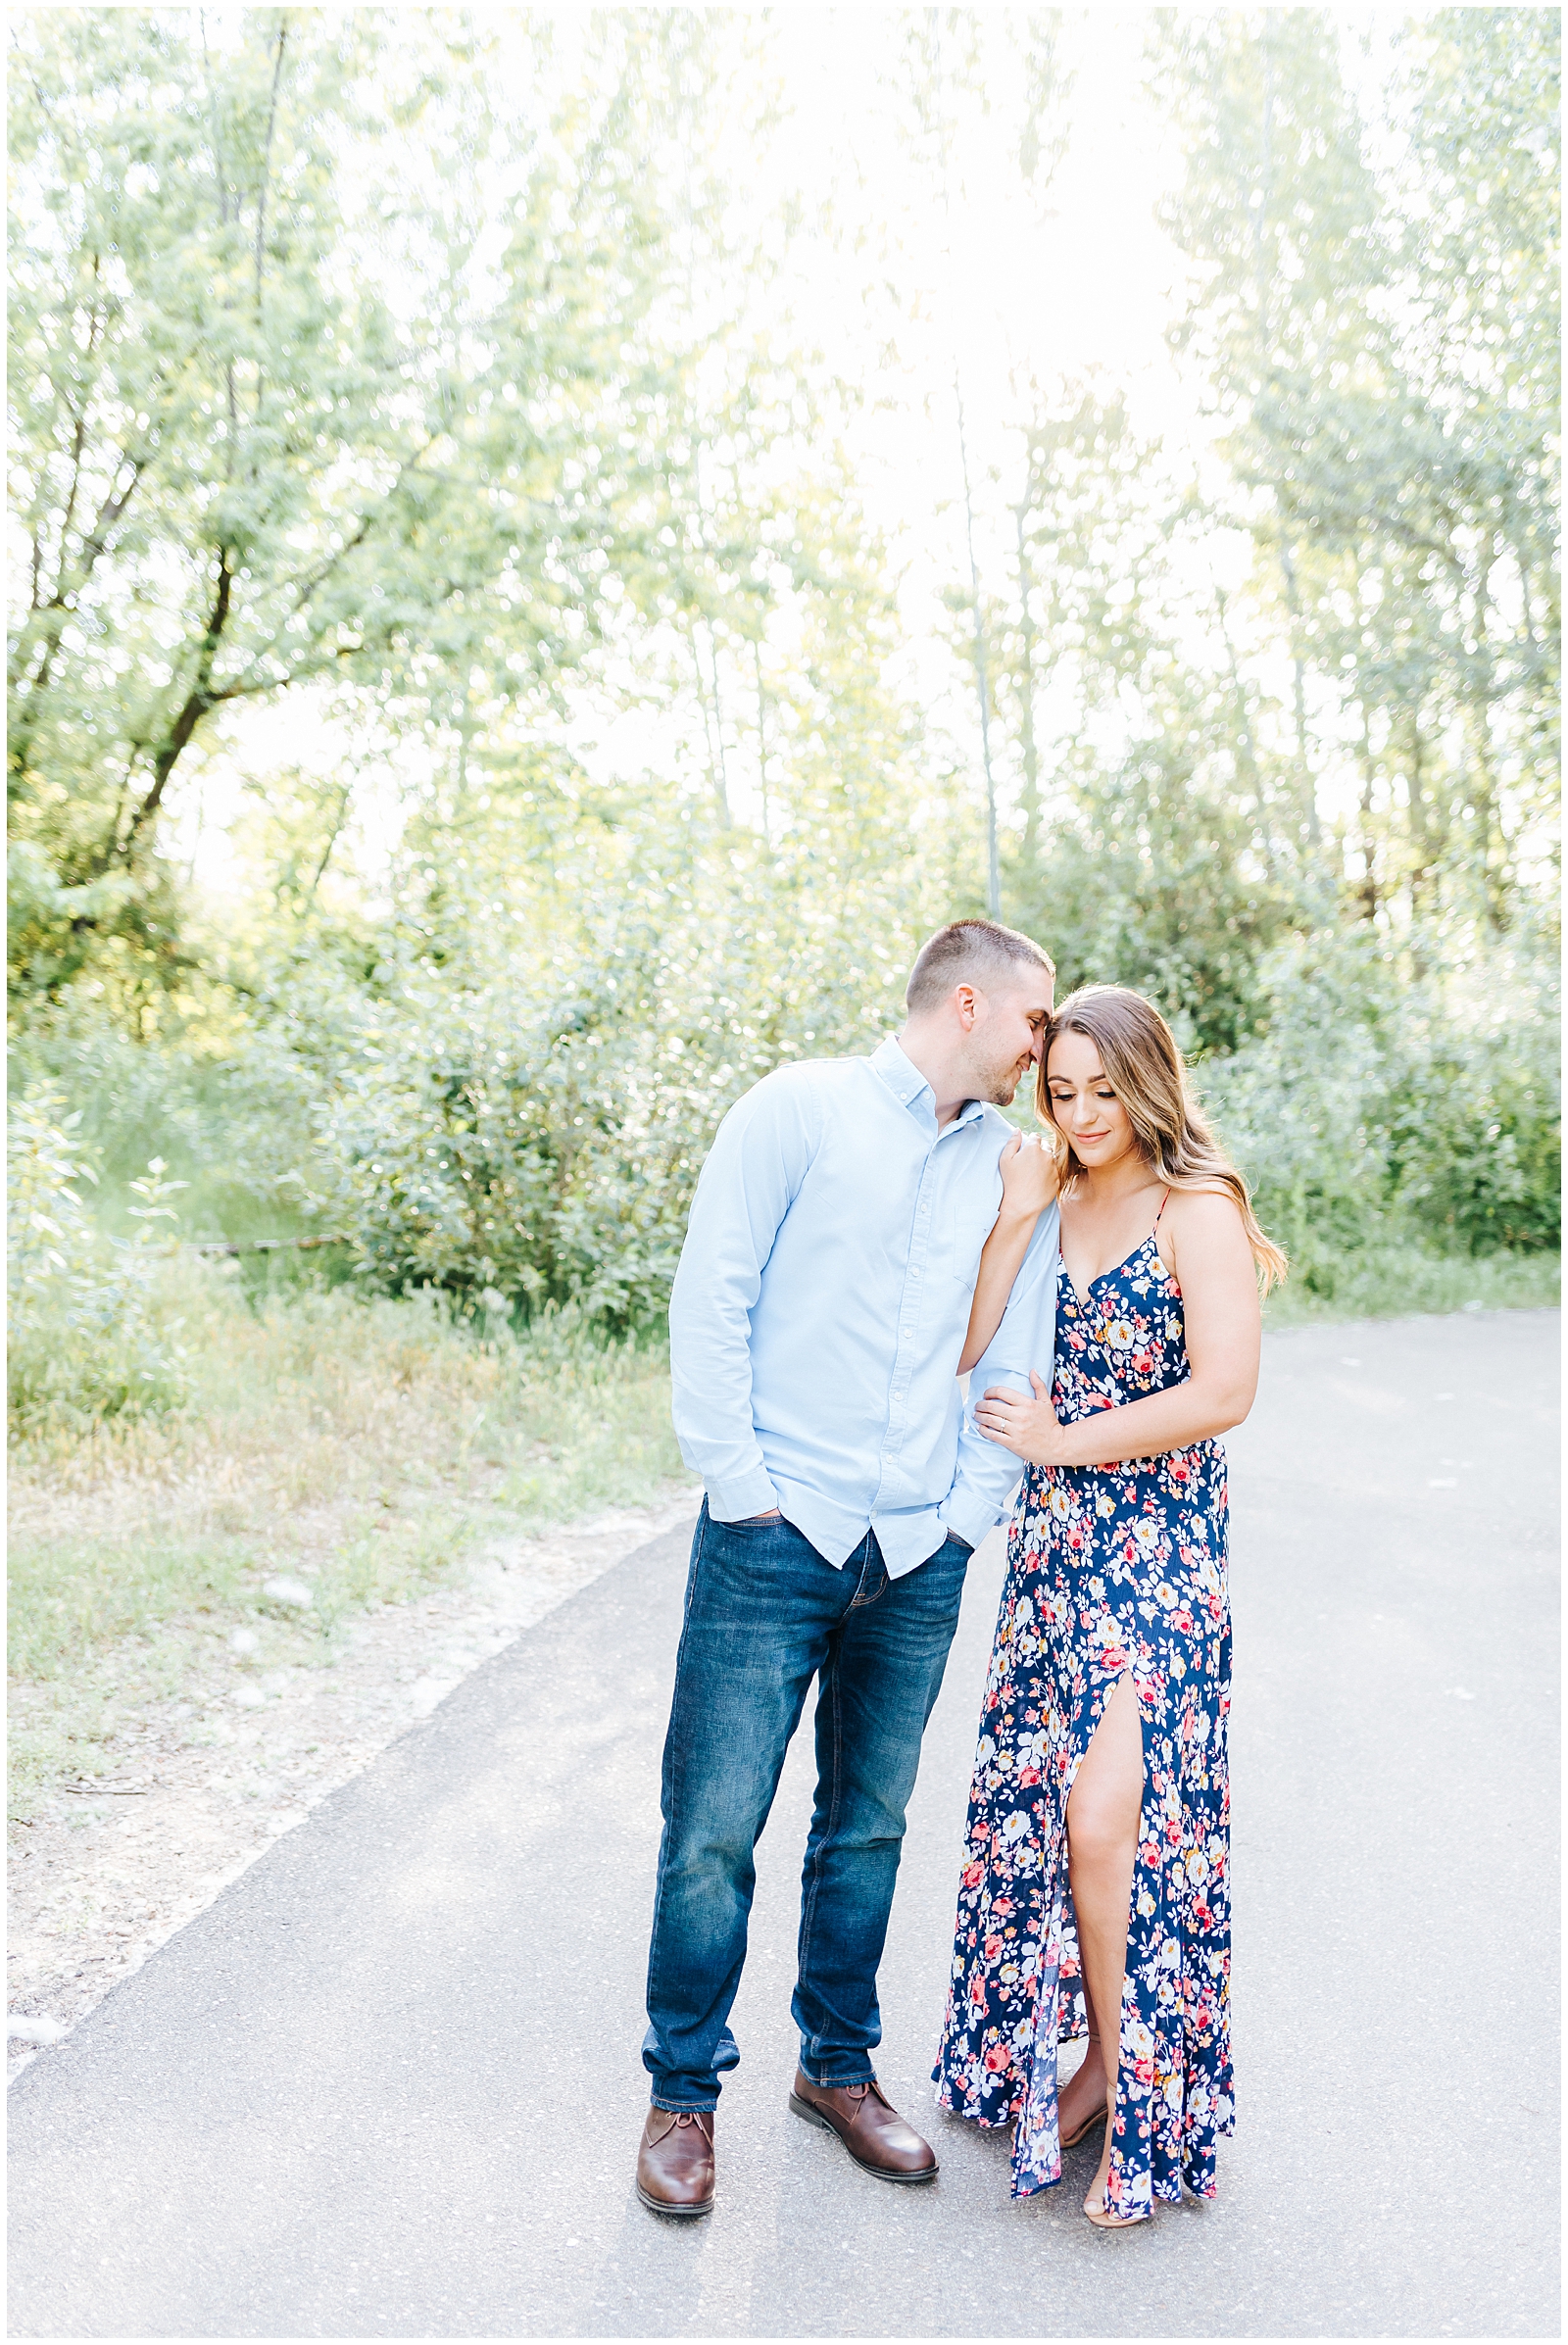 Dreamy Romantic Light and Airy Spring Engagement Session on the Boise River